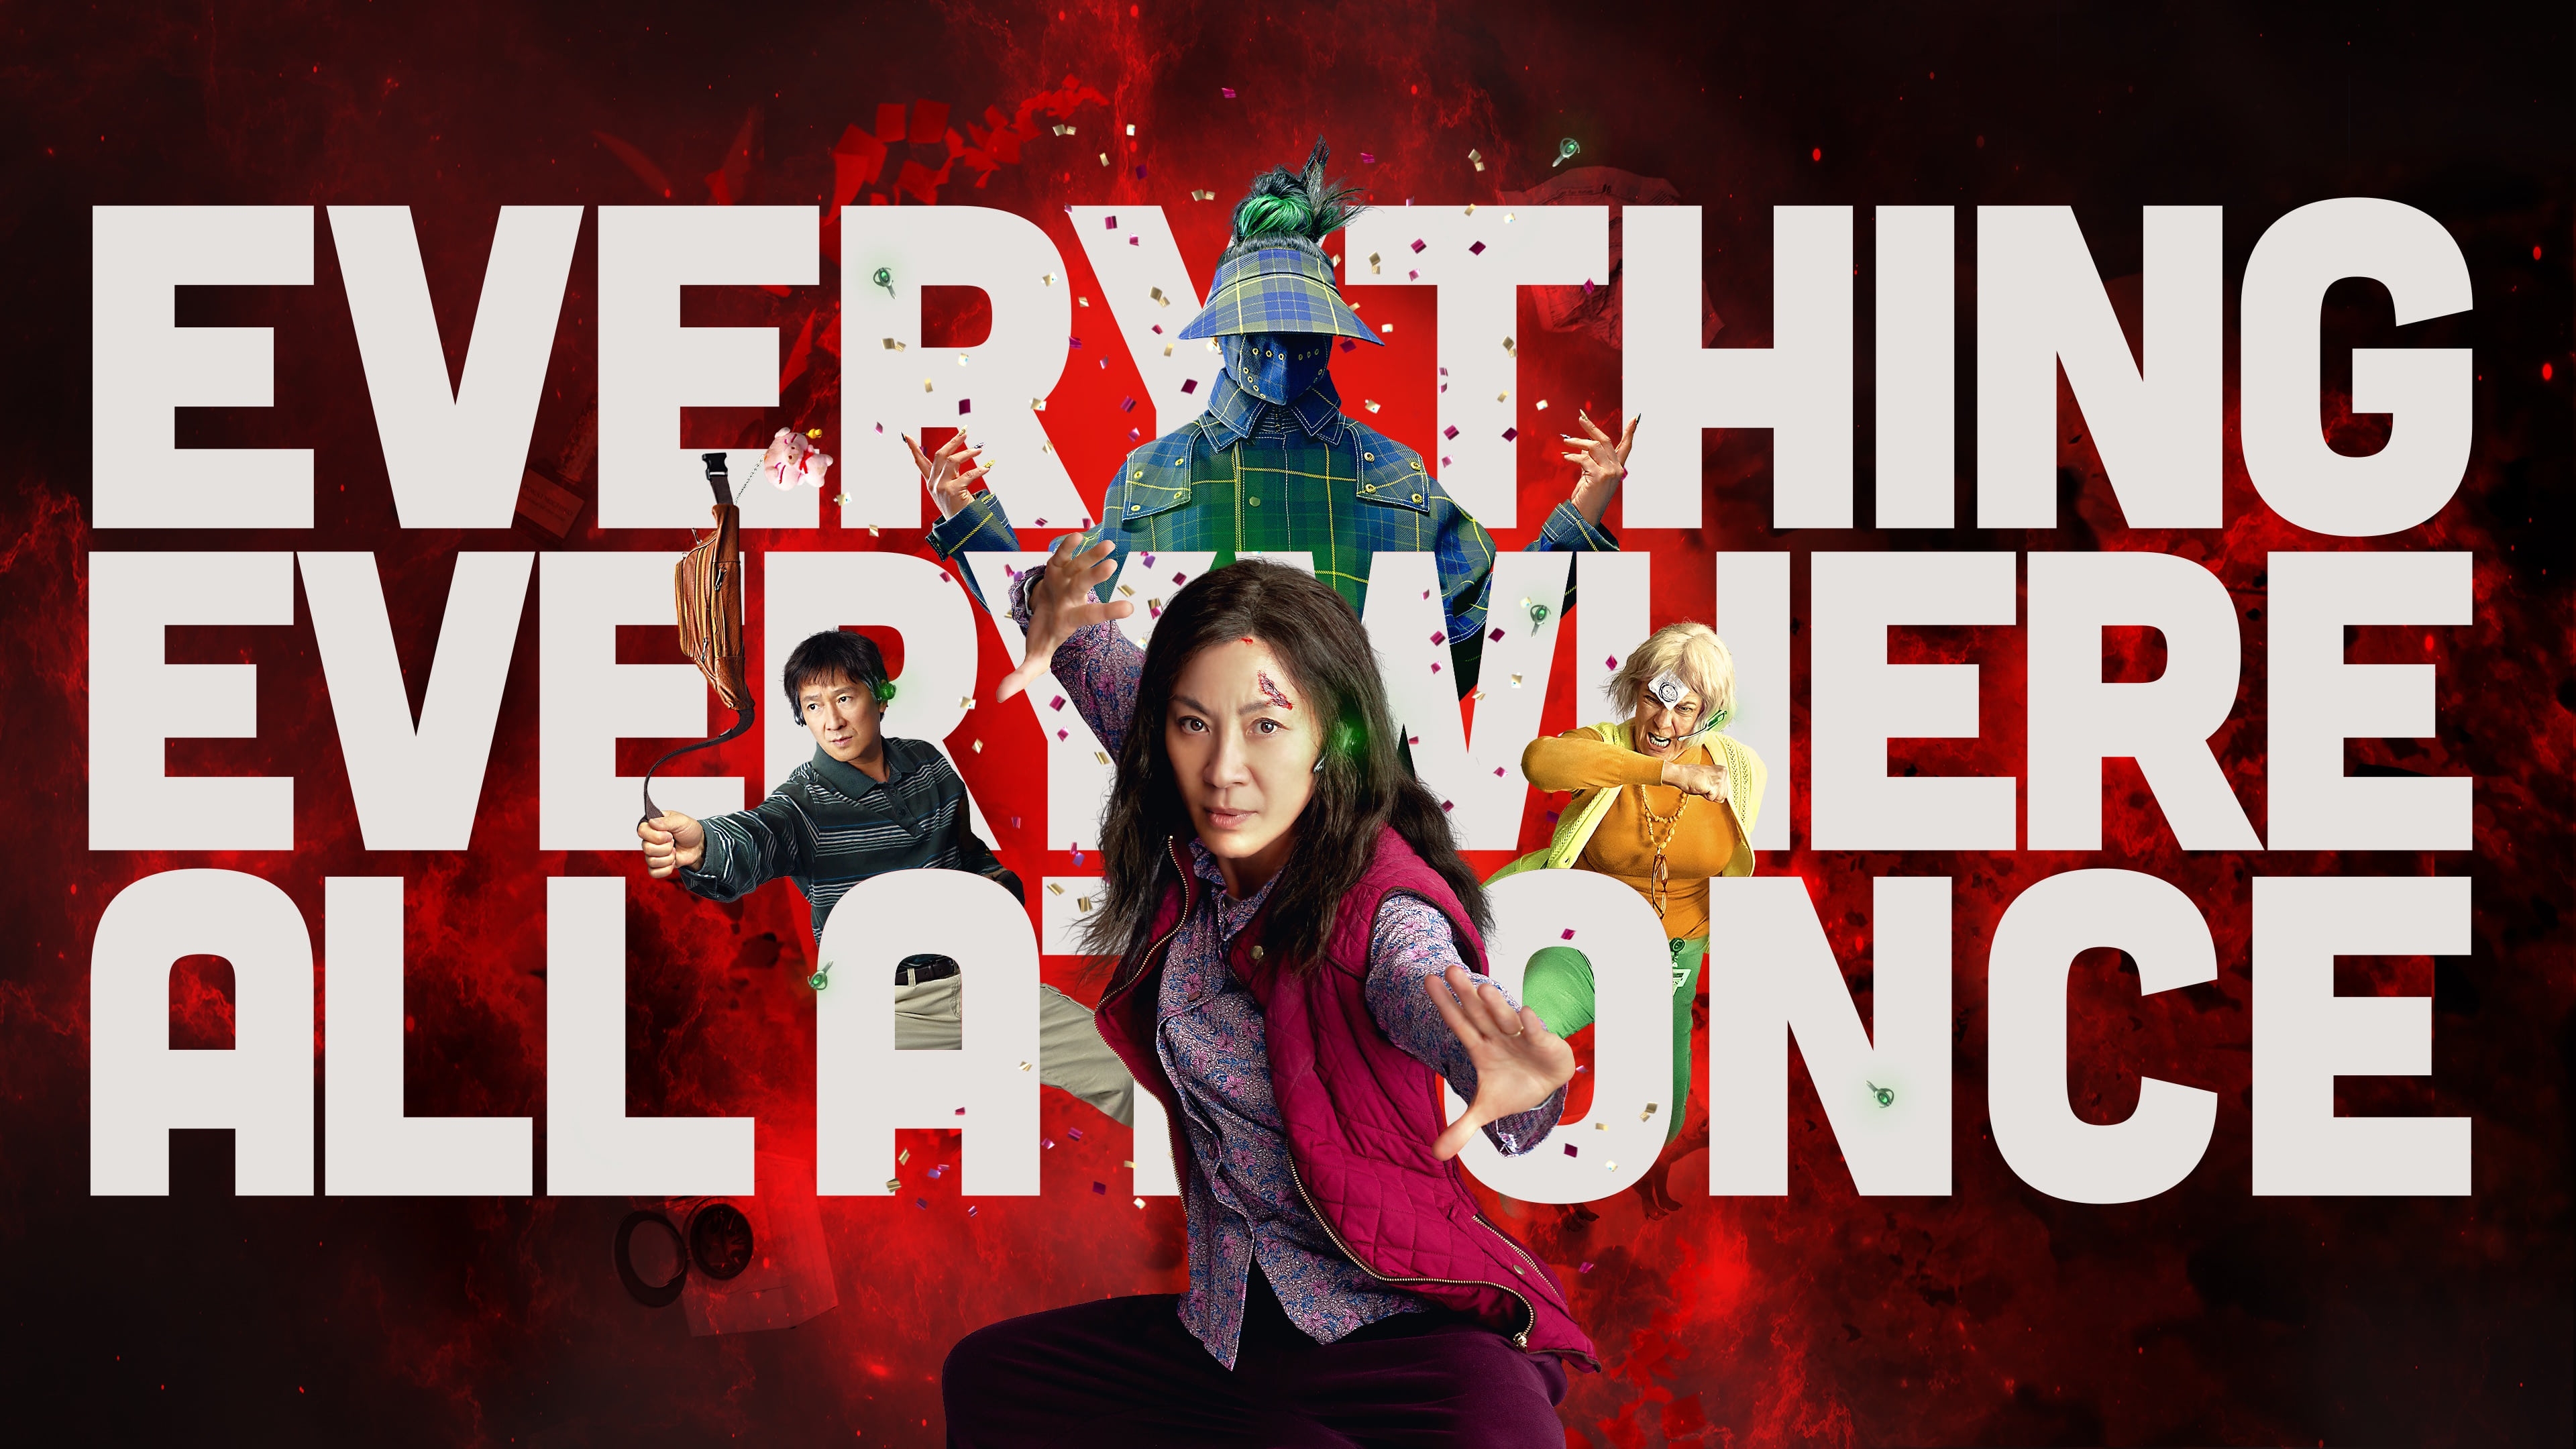 HD wallpaper, Michelle Yeoh As Evelyn Wang, Everything Everywhere All At Once, Adventure Movies